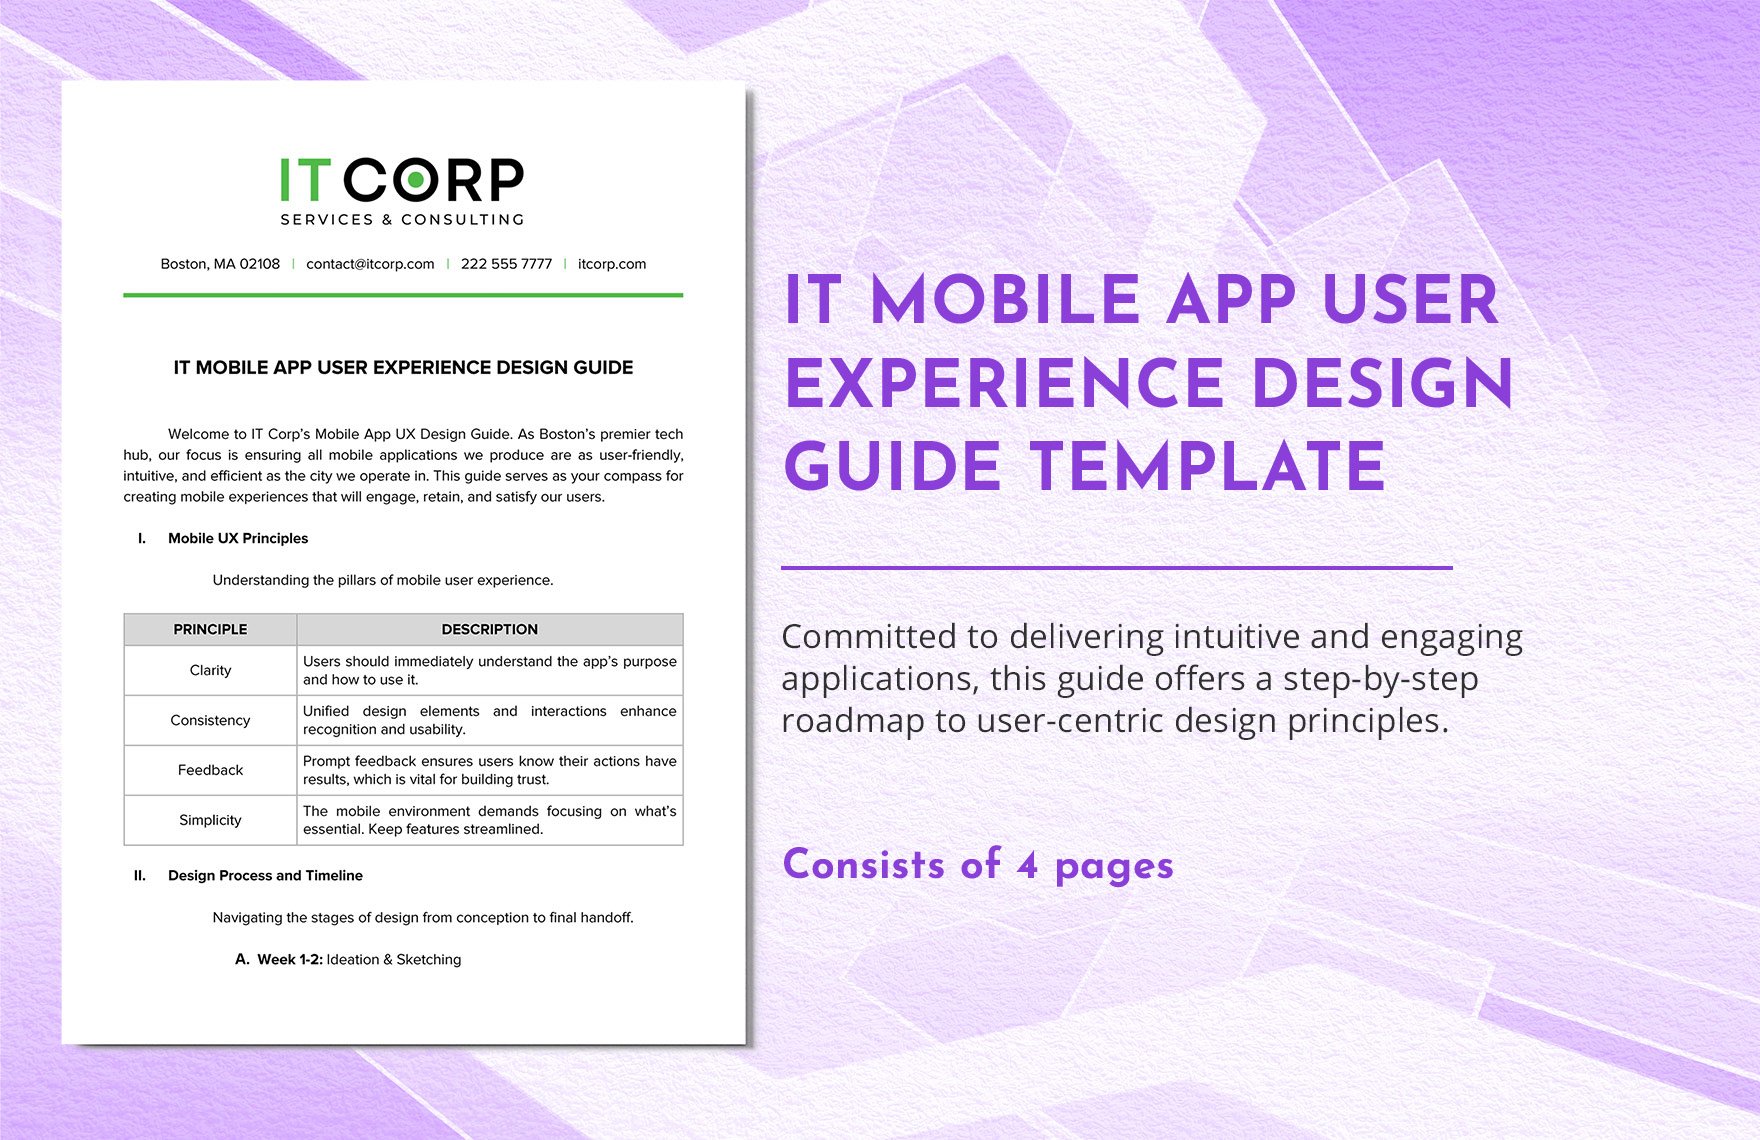 IT Mobile App User Experience Design Guide Template in Word, Google Docs, PDF